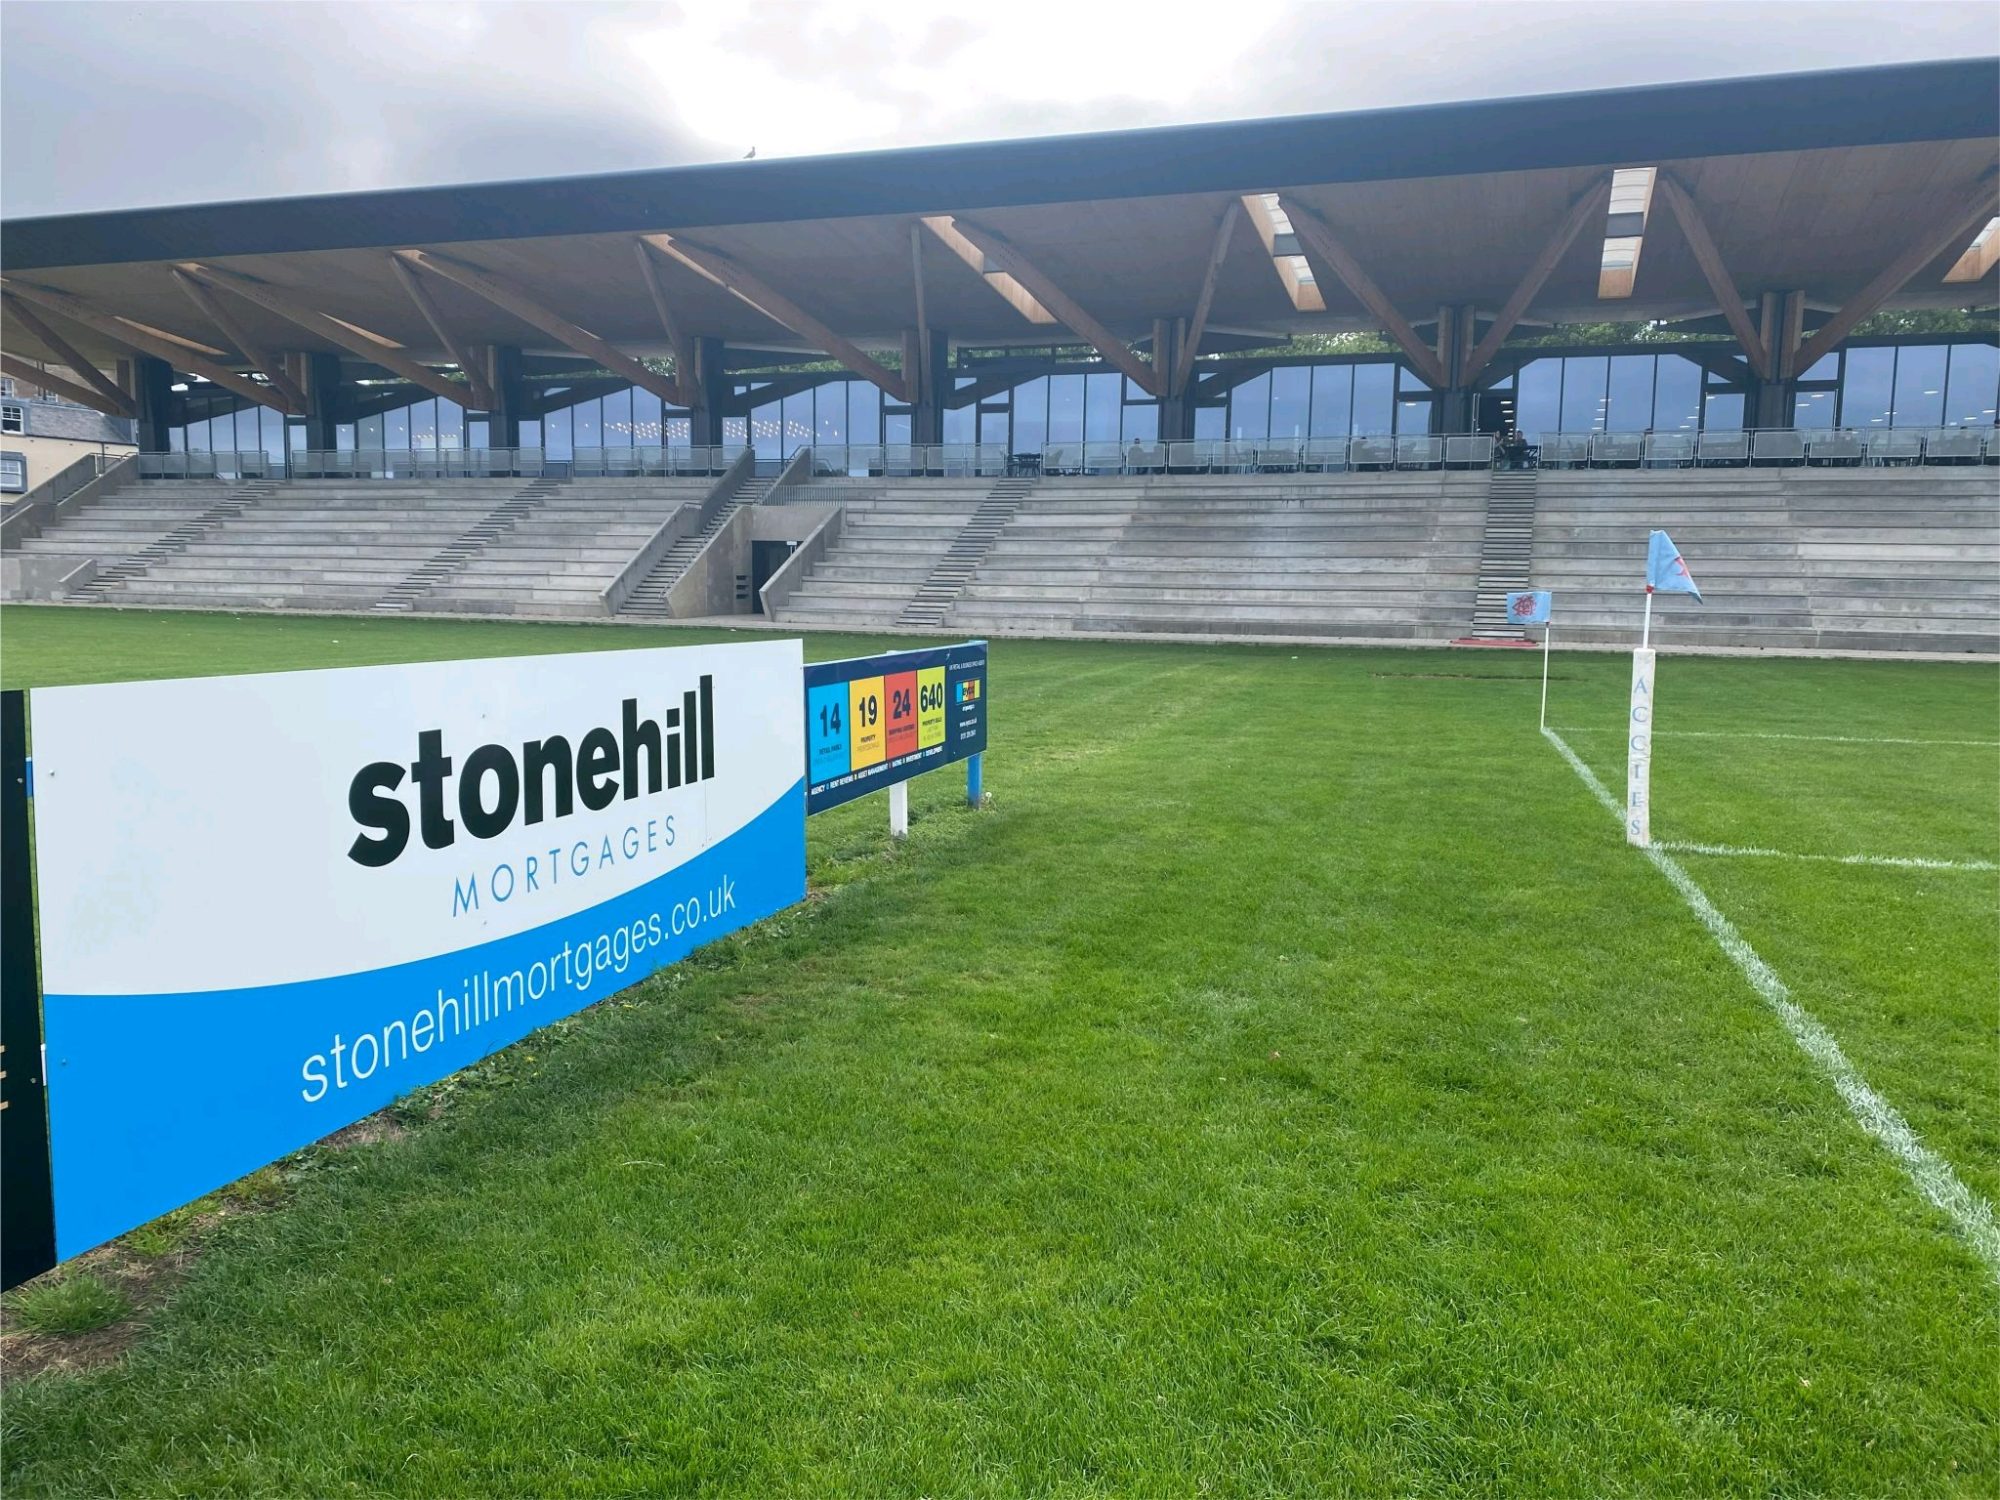 Stonehill Mortgages pitchside advertising hoarding